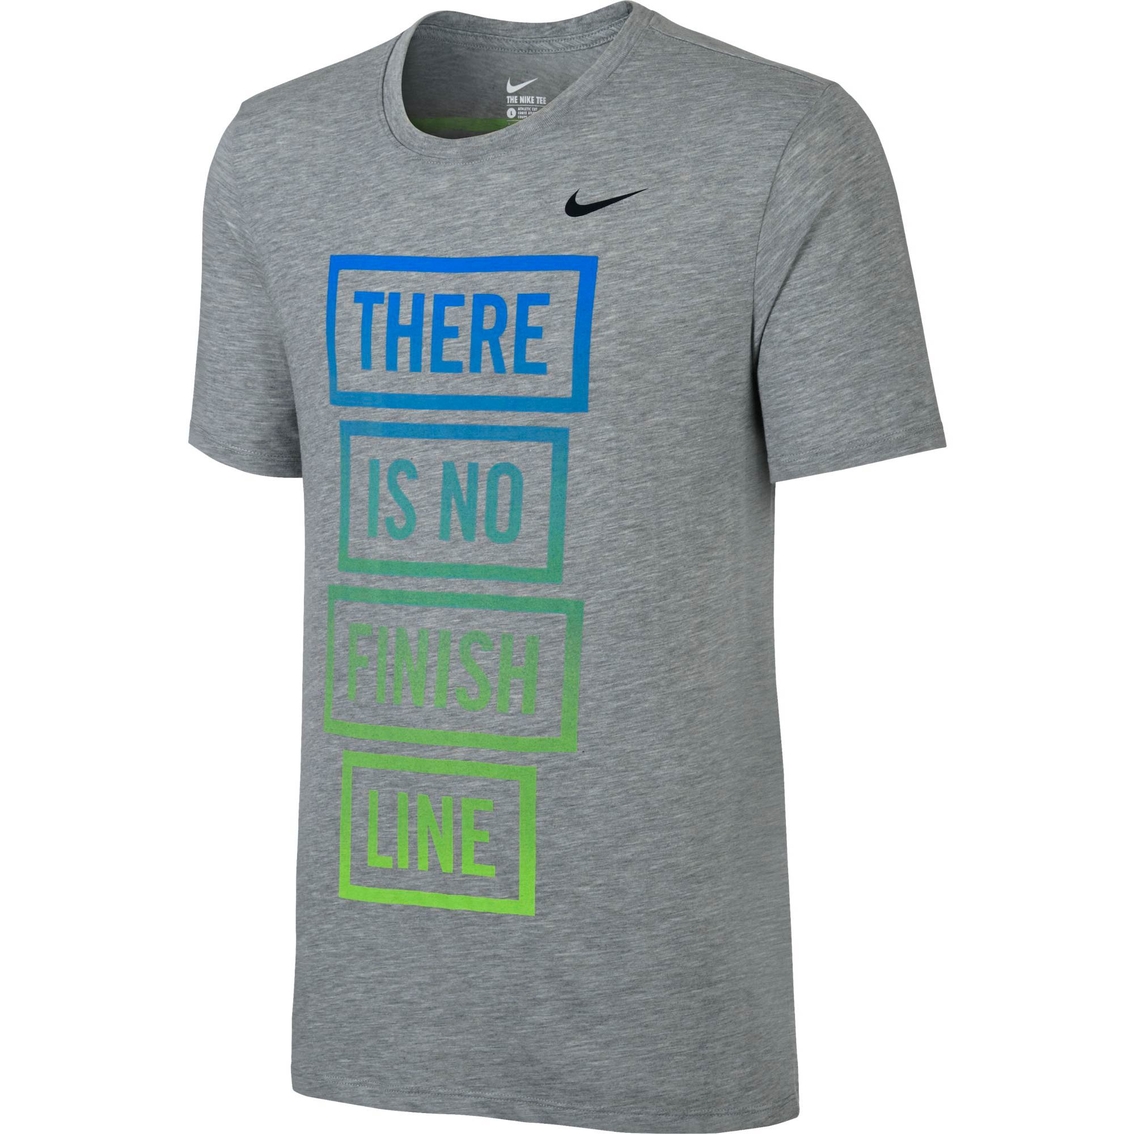 Buy > there is no finish line nike t shirt > in stock